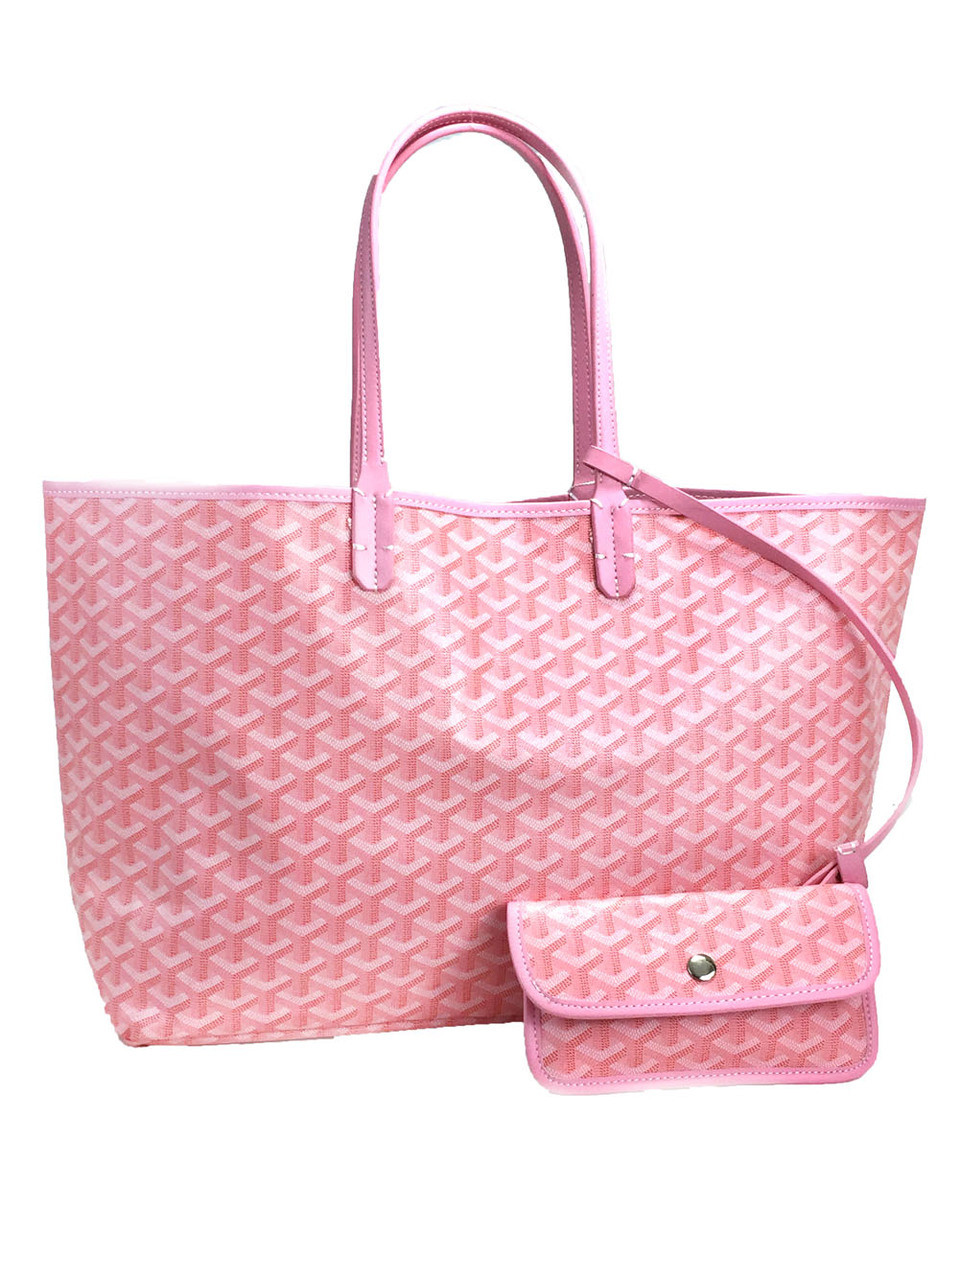 Goyard Ultra Rare Pink Chevron St Louis Tote with Pouch 1GY1202 at